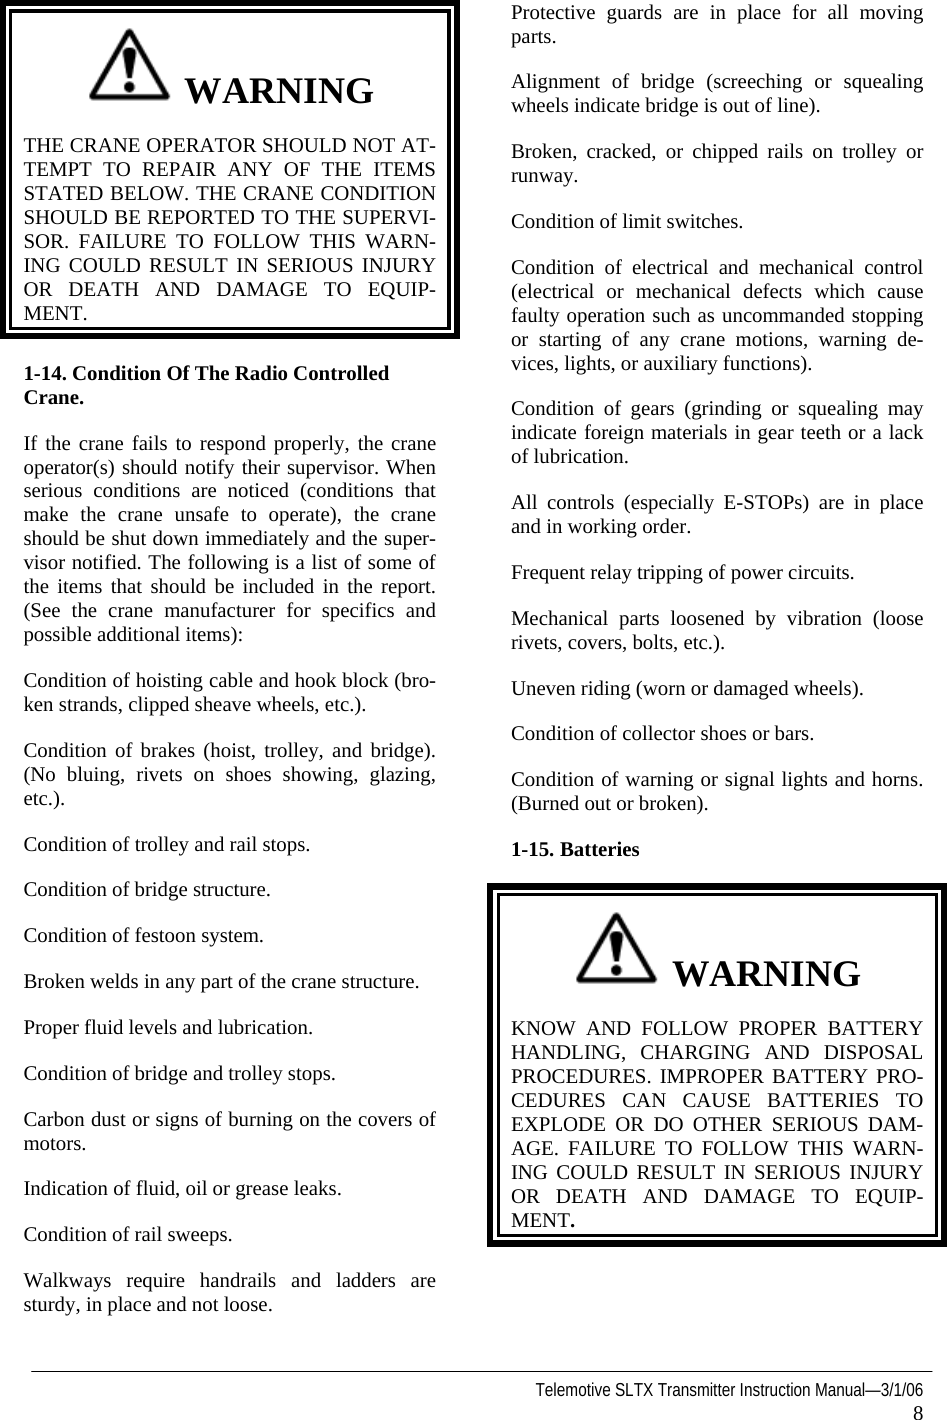   Telemotive SLTX Transmitter Instruction Manual—3/1/06 8   WARNING THE CRANE OPERATOR SHOULD NOT AT-TEMPT TO REPAIR ANY OF THE ITEMS STATED BELOW. THE CRANE CONDITION SHOULD BE REPORTED TO THE SUPERVI-SOR. FAILURE TO FOLLOW THIS WARN-ING COULD RESULT IN SERIOUS INJURY OR DEATH AND DAMAGE TO EQUIP-MENT. 1-14. Condition Of The Radio Controlled Crane. If the crane fails to respond properly, the crane operator(s) should notify their supervisor. When serious conditions are noticed (conditions that make the crane unsafe to operate), the crane should be shut down immediately and the super-visor notified. The following is a list of some of the items that should be included in the report. (See the crane manufacturer for specifics and possible additional items): Condition of hoisting cable and hook block (bro-ken strands, clipped sheave wheels, etc.). Condition of brakes (hoist, trolley, and bridge). (No bluing, rivets on shoes showing, glazing, etc.). Condition of trolley and rail stops. Condition of bridge structure. Condition of festoon system. Broken welds in any part of the crane structure. Proper fluid levels and lubrication. Condition of bridge and trolley stops. Carbon dust or signs of burning on the covers of motors. Indication of fluid, oil or grease leaks. Condition of rail sweeps. Walkways require handrails and ladders are sturdy, in place and not loose. Protective guards are in place for all moving parts. Alignment of bridge (screeching or squealing wheels indicate bridge is out of line). Broken, cracked, or chipped rails on trolley or runway. Condition of limit switches. Condition of electrical and mechanical control (electrical or mechanical defects which cause faulty operation such as uncommanded stopping or starting of any crane motions, warning de-vices, lights, or auxiliary functions). Condition of gears (grinding or squealing may indicate foreign materials in gear teeth or a lack of lubrication. All controls (especially E-STOPs) are in place and in working order. Frequent relay tripping of power circuits. Mechanical parts loosened by vibration (loose rivets, covers, bolts, etc.). Uneven riding (worn or damaged wheels). Condition of collector shoes or bars. Condition of warning or signal lights and horns. (Burned out or broken). 1-15.   Batteries    WARNING KNOW AND FOLLOW PROPER BATTERY HANDLING, CHARGING AND DISPOSAL PROCEDURES. IMPROPER BATTERY PRO-CEDURES CAN CAUSE BATTERIES TO EXPLODE OR DO OTHER SERIOUS DAM-AGE. FAILURE TO FOLLOW THIS WARN-ING COULD RESULT IN SERIOUS INJURY OR DEATH AND DAMAGE TO EQUIP-MENT.   